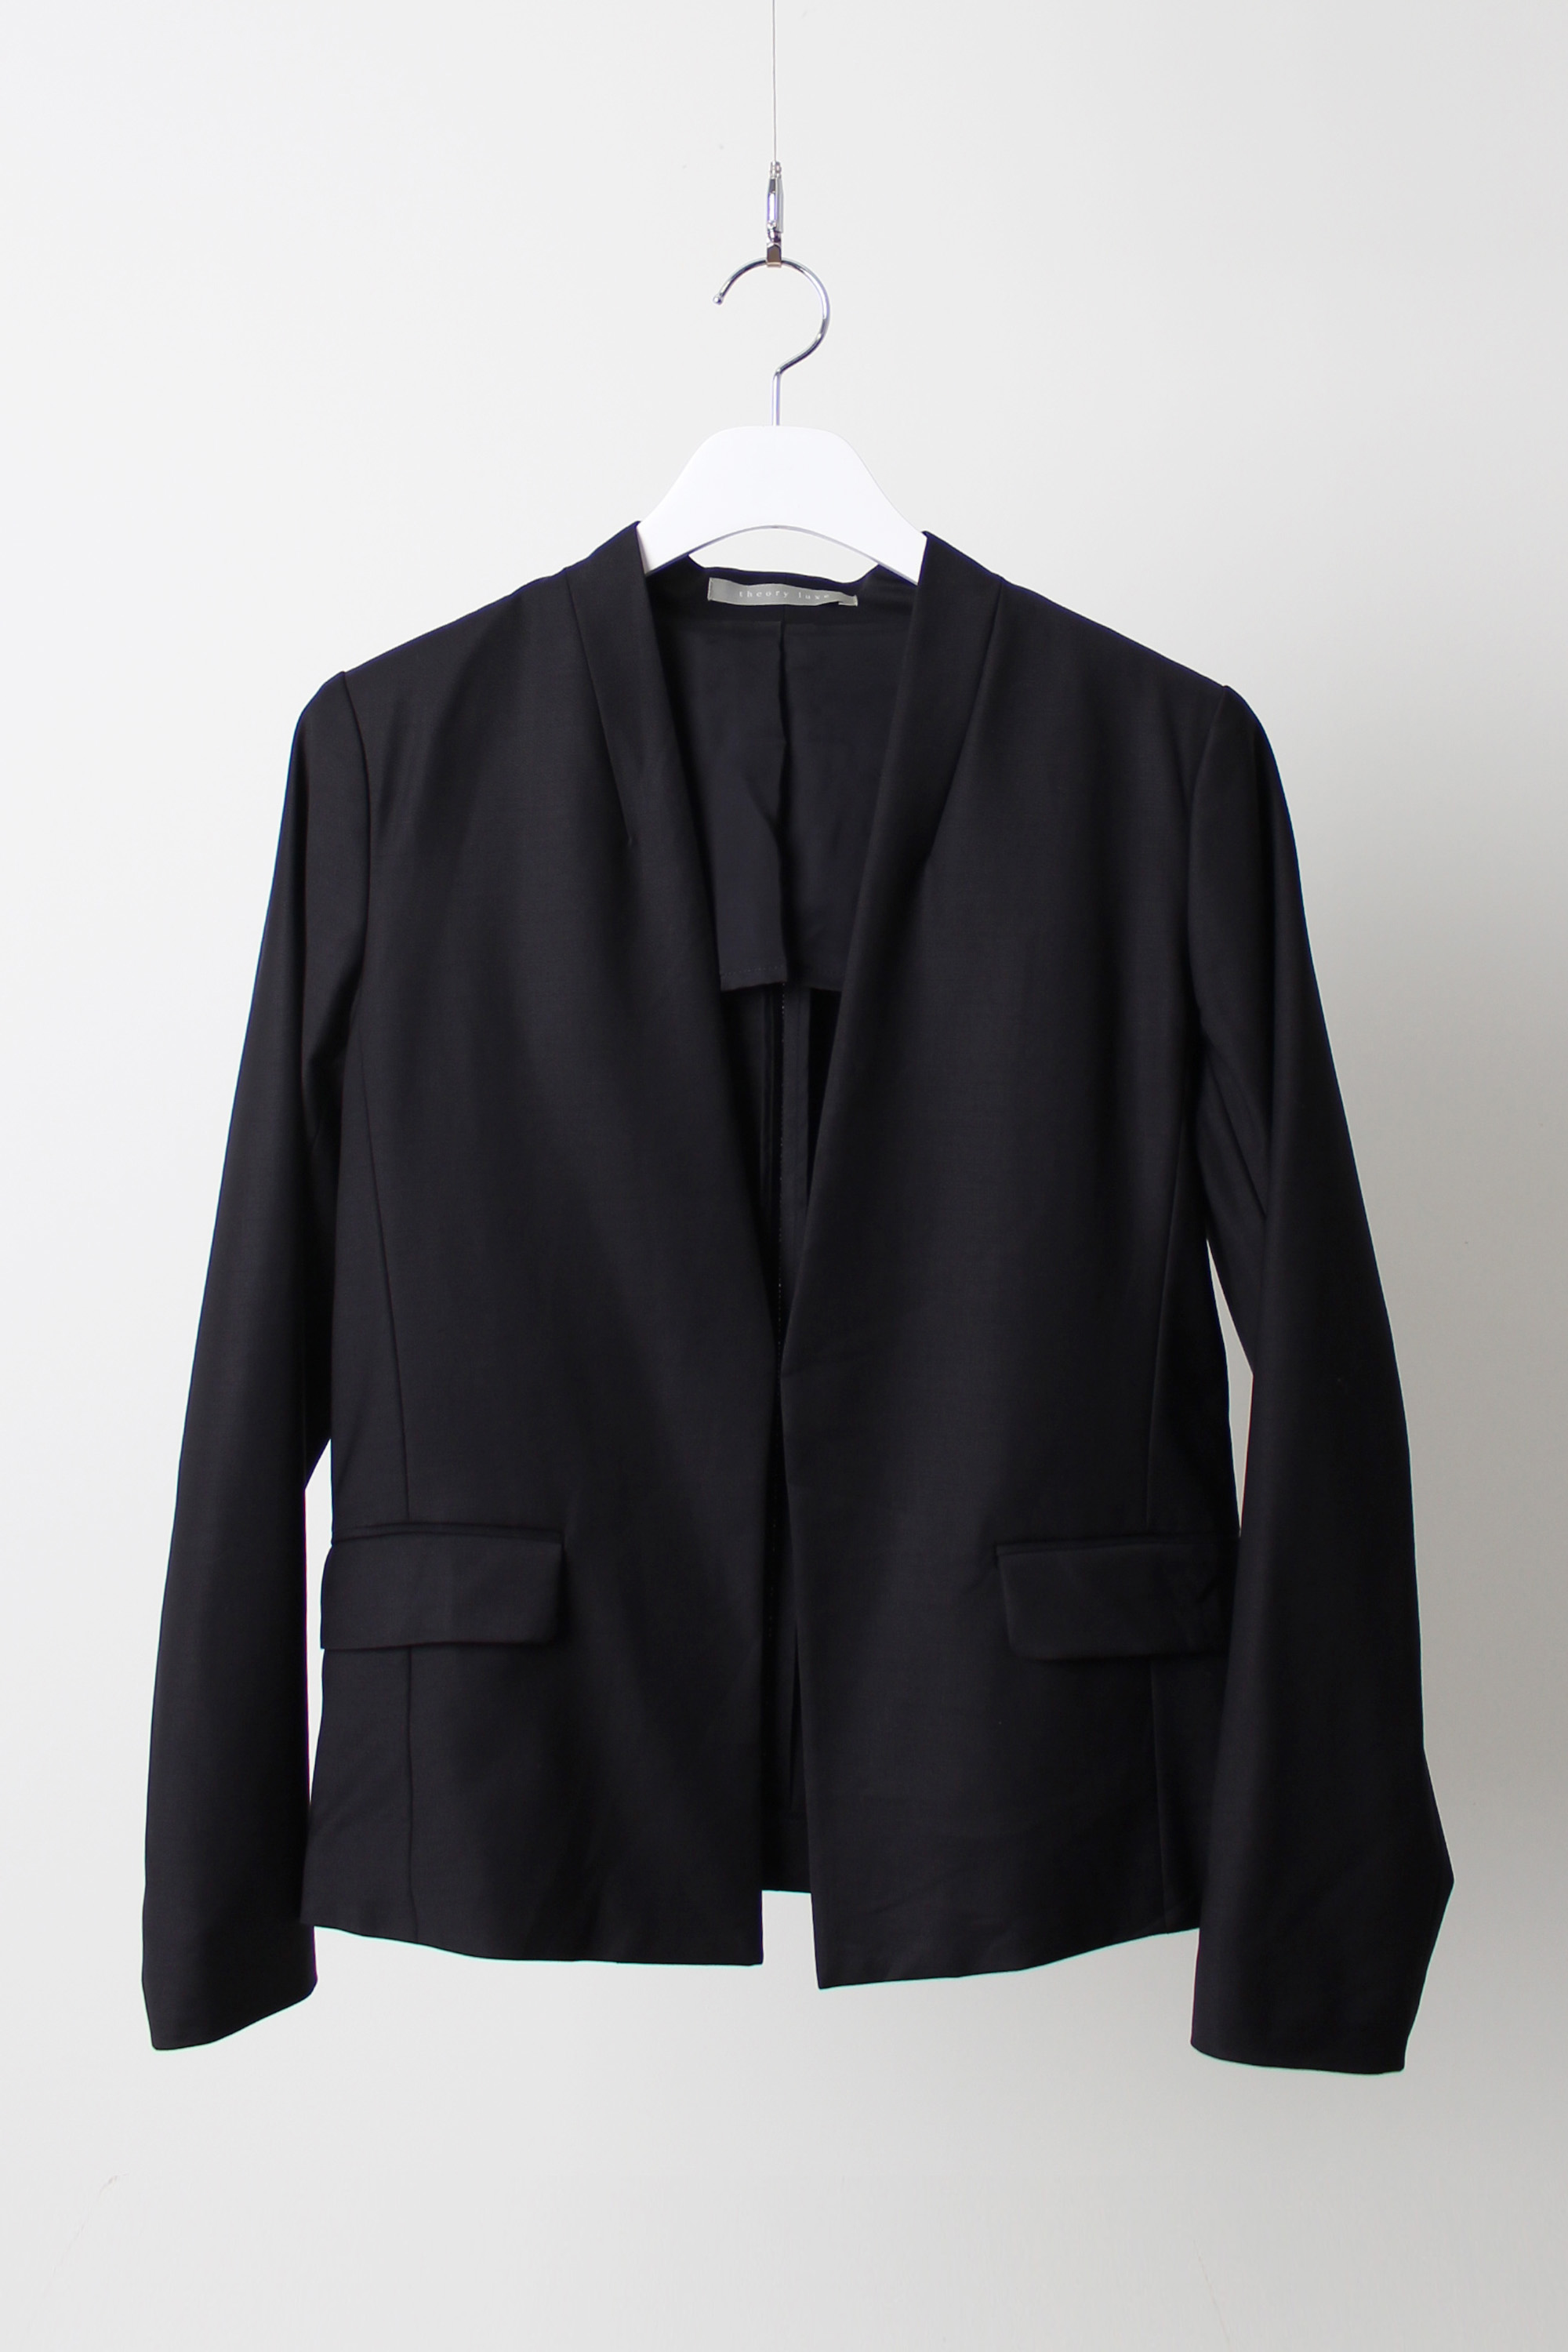 Theory luxe  jacket